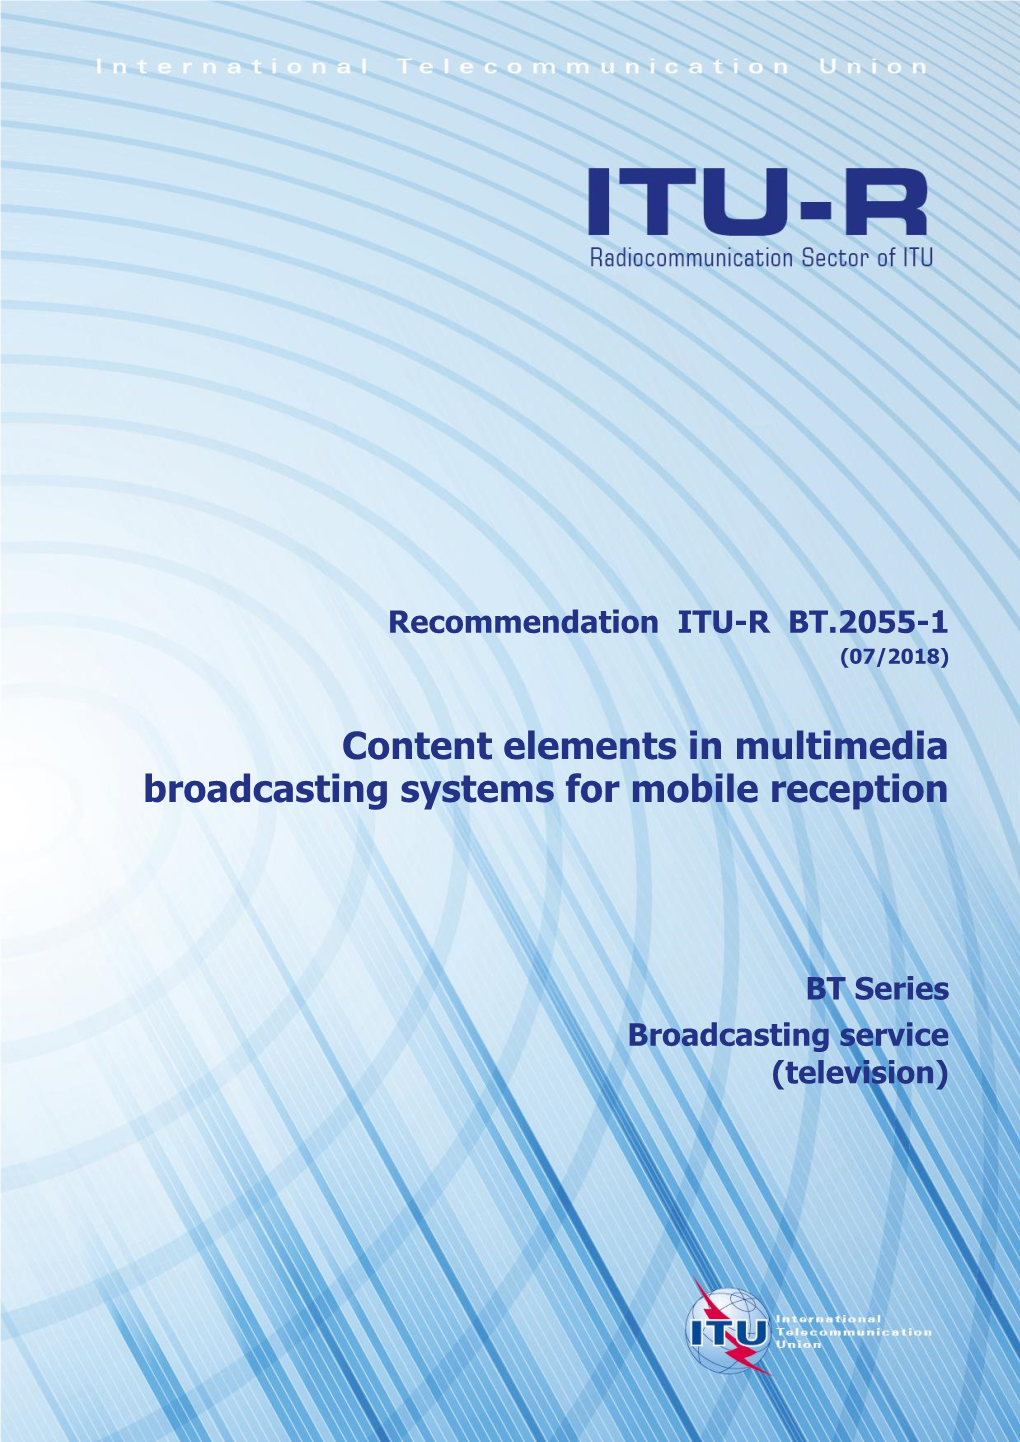 Content Elements in Multimedia Broadcasting Systems for Mobile Reception